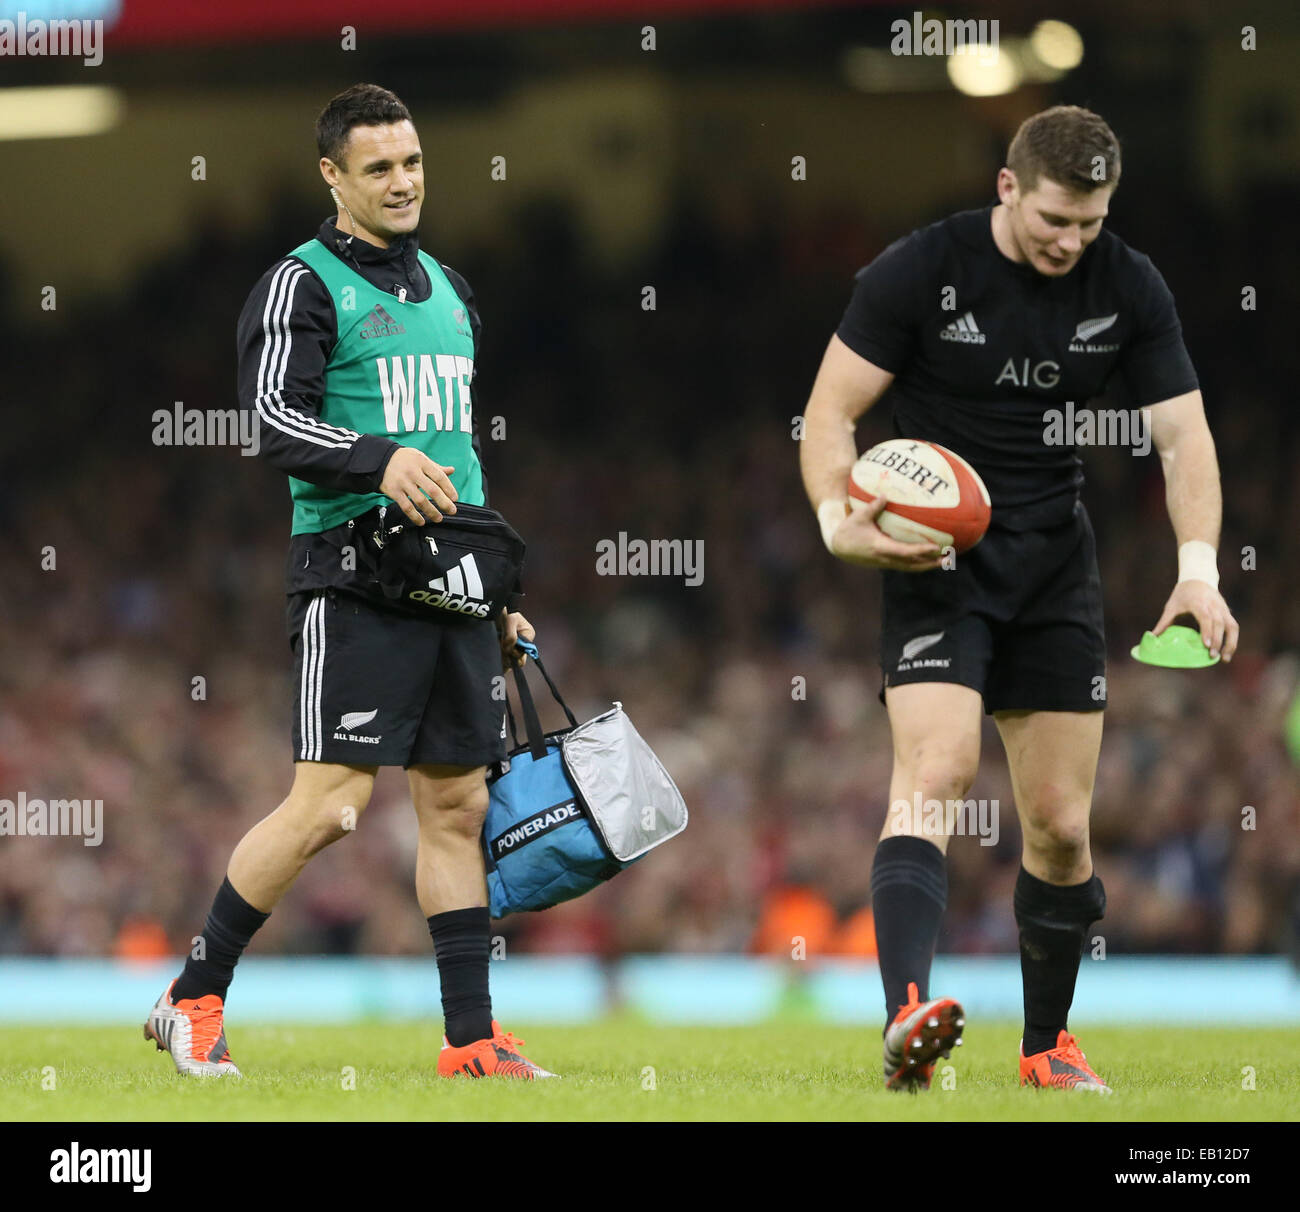 Cardiff, UK. 22nd Nov, 2014. Dan Carter of New Zealand (L) the water boy for the day - Autumn Test Series - Wales vs New Zealand - Millennium Stadium - Cardiff - Wales - 22nd November 2014 - Picture Simon Bellis/Sportimage. © csm/Alamy Live News Stock Photo